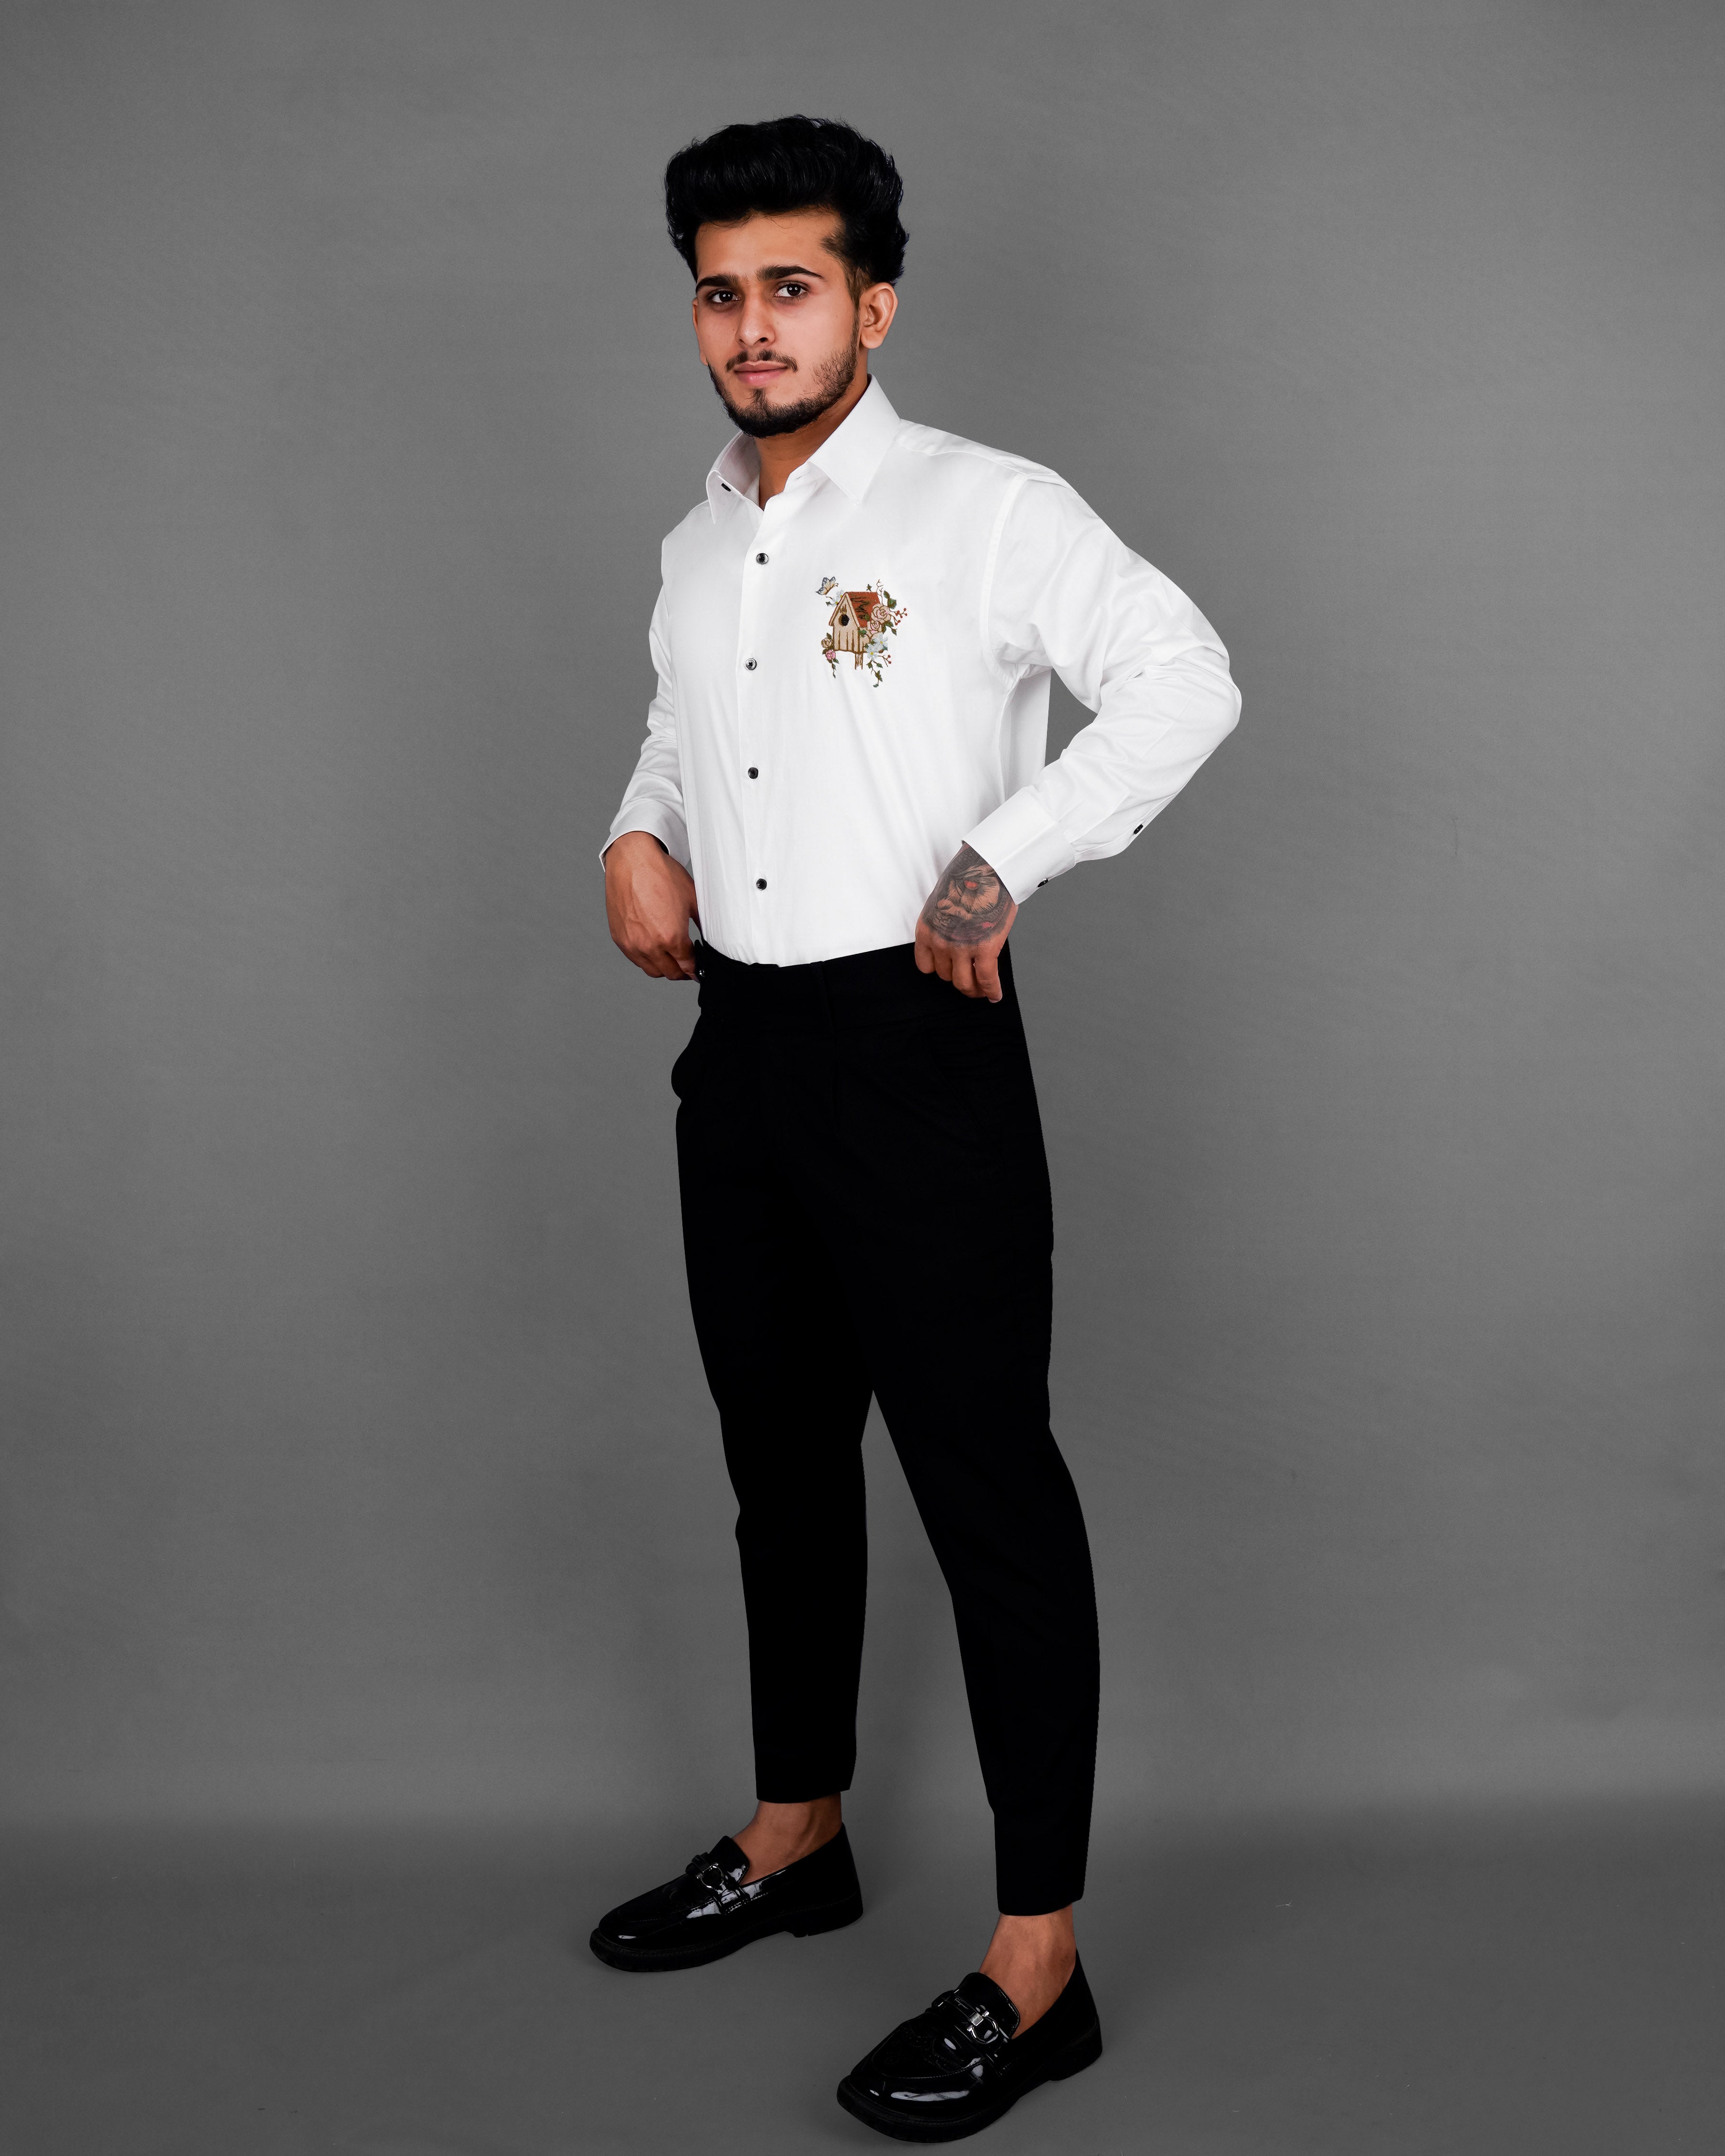 Bright White Subtle Sheen with House and Flower Embroidered Super Soft Premium Cotton Shirt 1062-BLK-P493-38,1062-BLK-P493-H-38,1062-BLK-P493-39,1062-BLK-P493-H-39,1062-BLK-P493-40,1062-BLK-P493-H-40,1062-BLK-P493-42,1062-BLK-P493-H-42,1062-BLK-P493-44,1062-BLK-P493-H-44,1062-BLK-P493-46,1062-BLK-P493-H-46,1062-BLK-P493-48,1062-BLK-P493-H-48,1062-BLK-P493-50,1062-BLK-P493-H-50,1062-BLK-P493-52,1062-BLK-P493-H-52